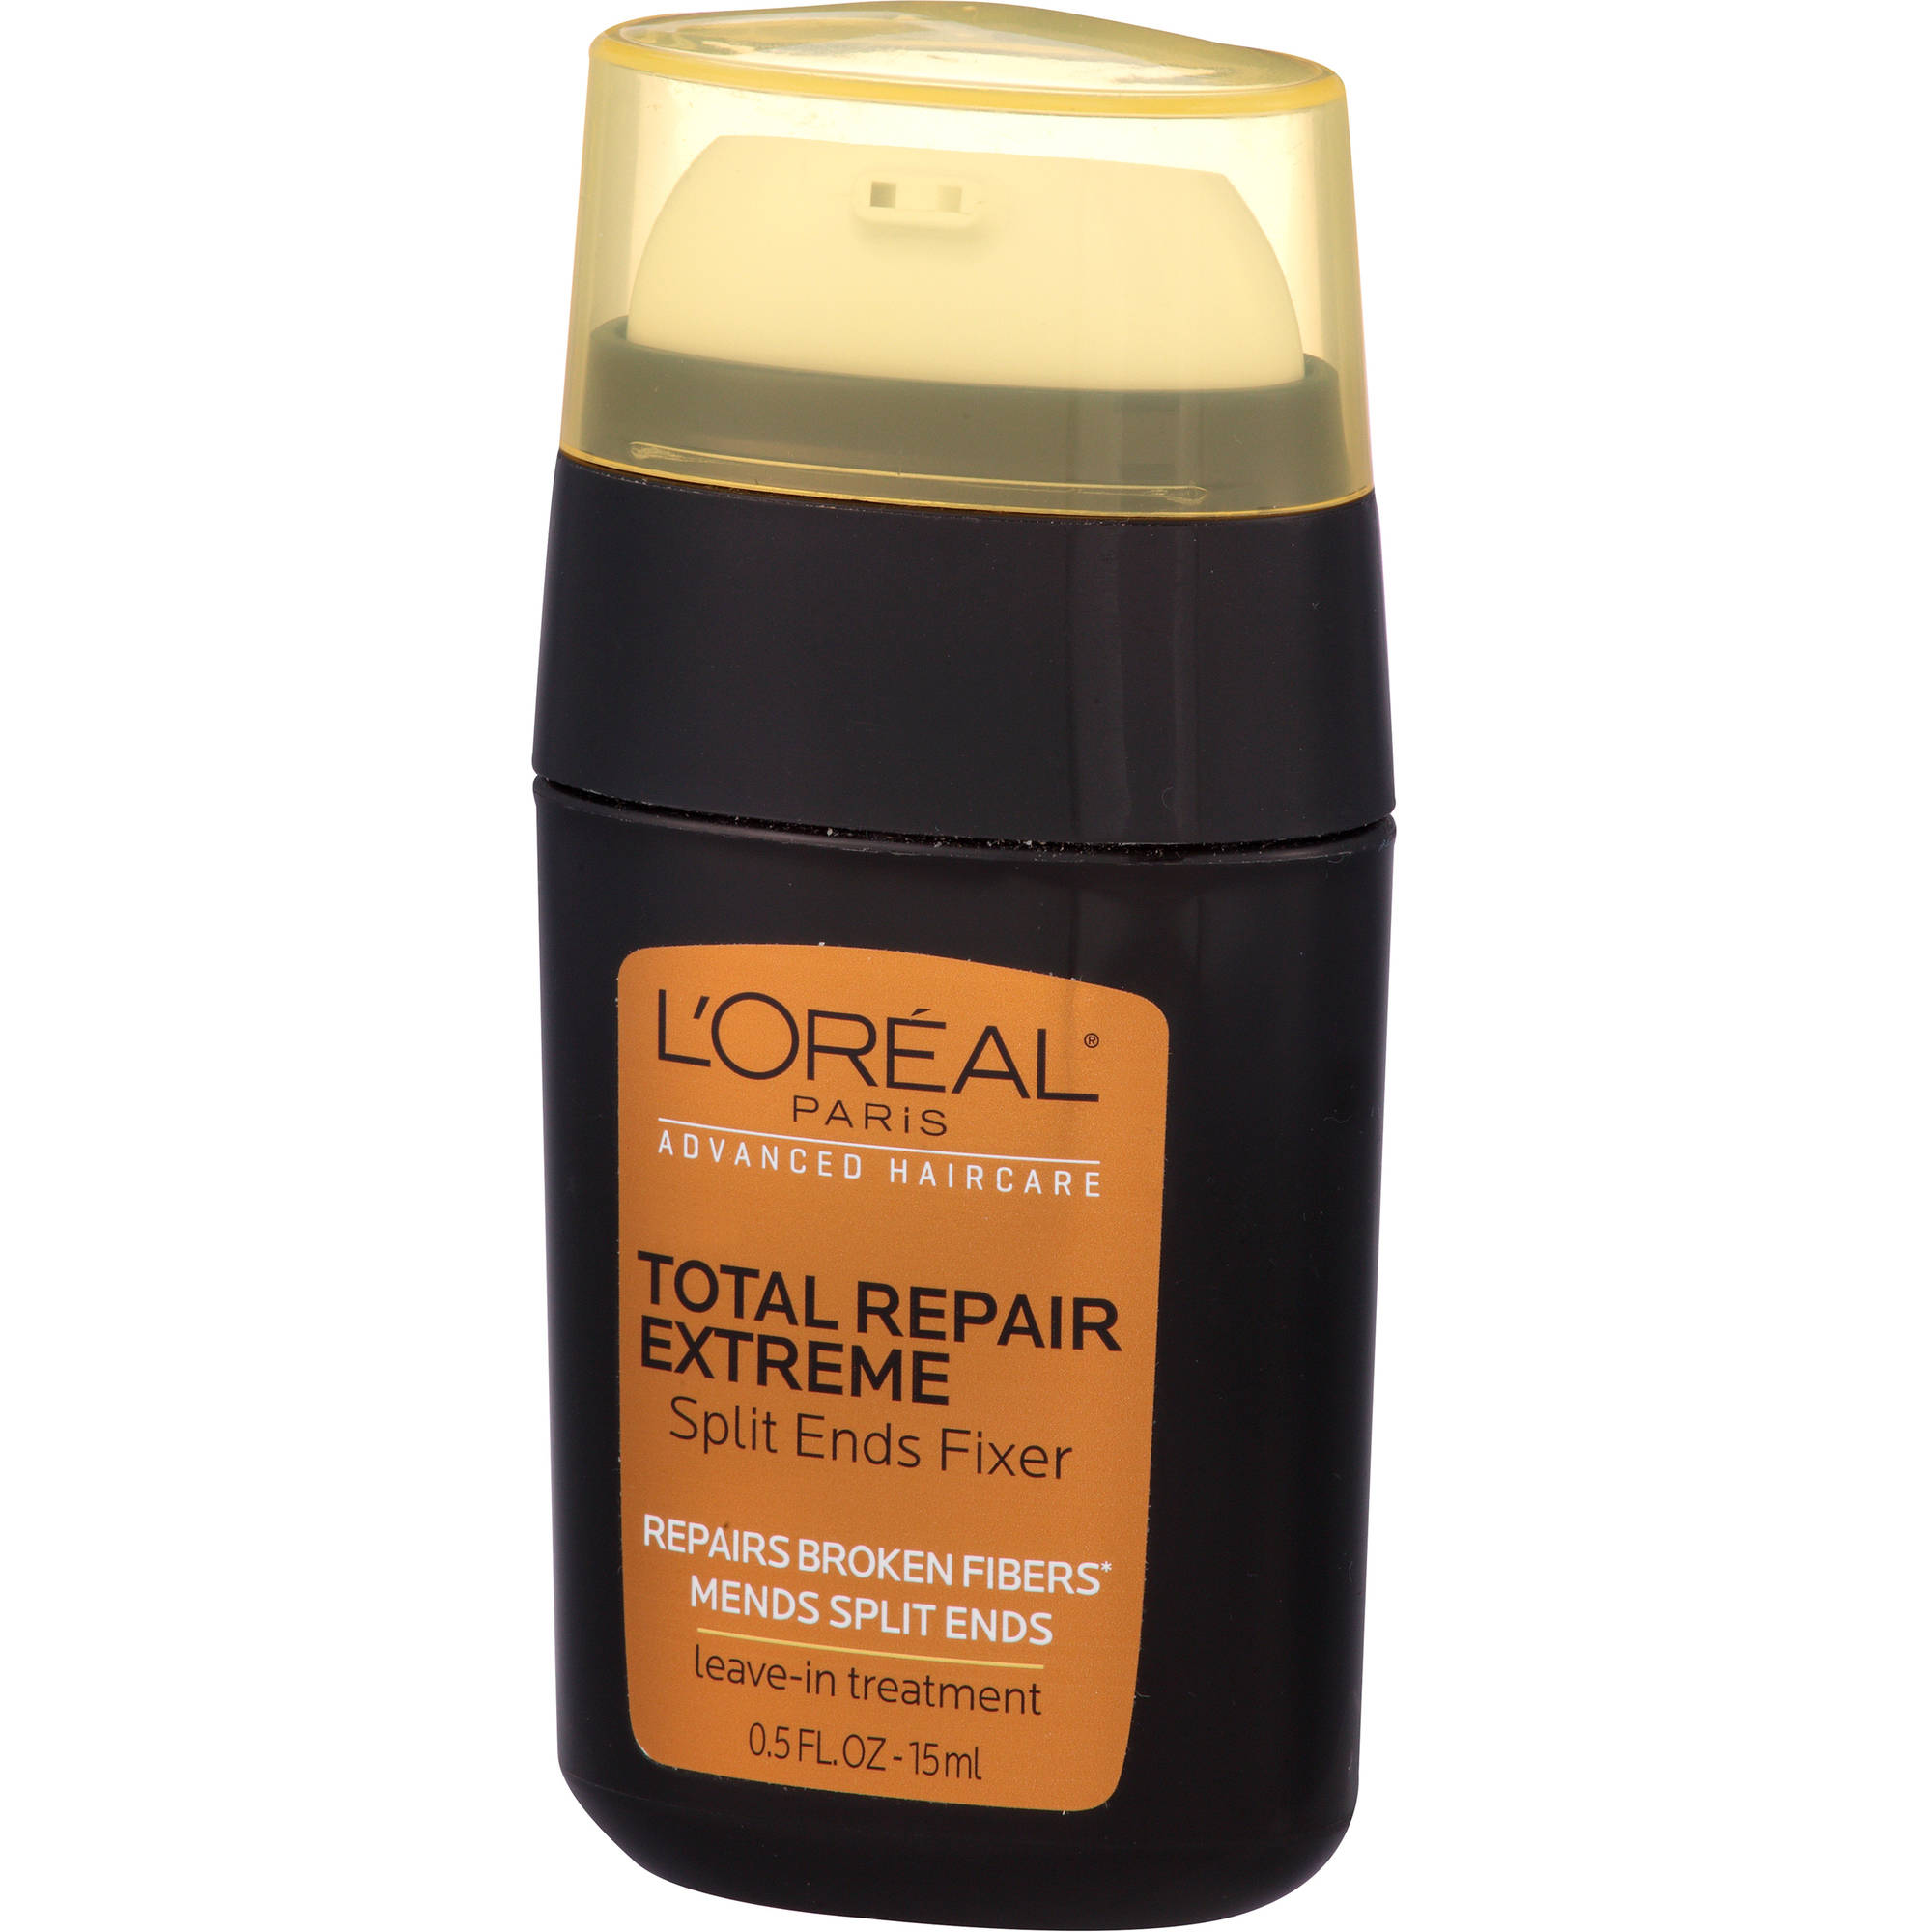 L'Oreal Advanced Haircare Total Repair Extreme Split Ends Fixer Leave-In Treatment 0.50 oz - image 5 of 5